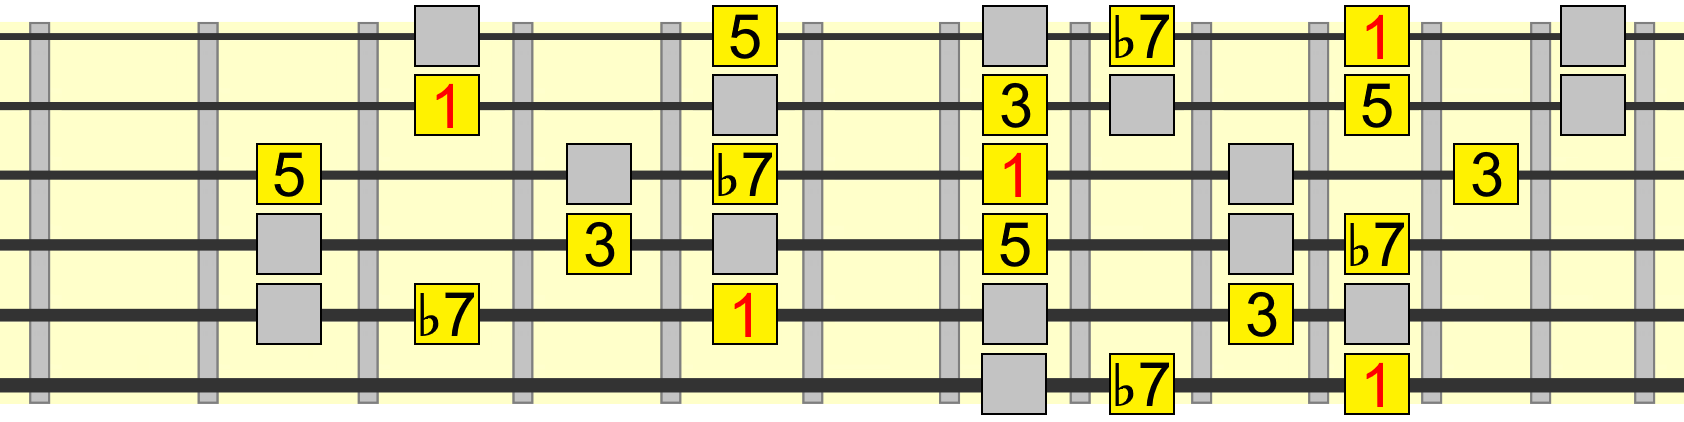 5 chord tones within mixolydian